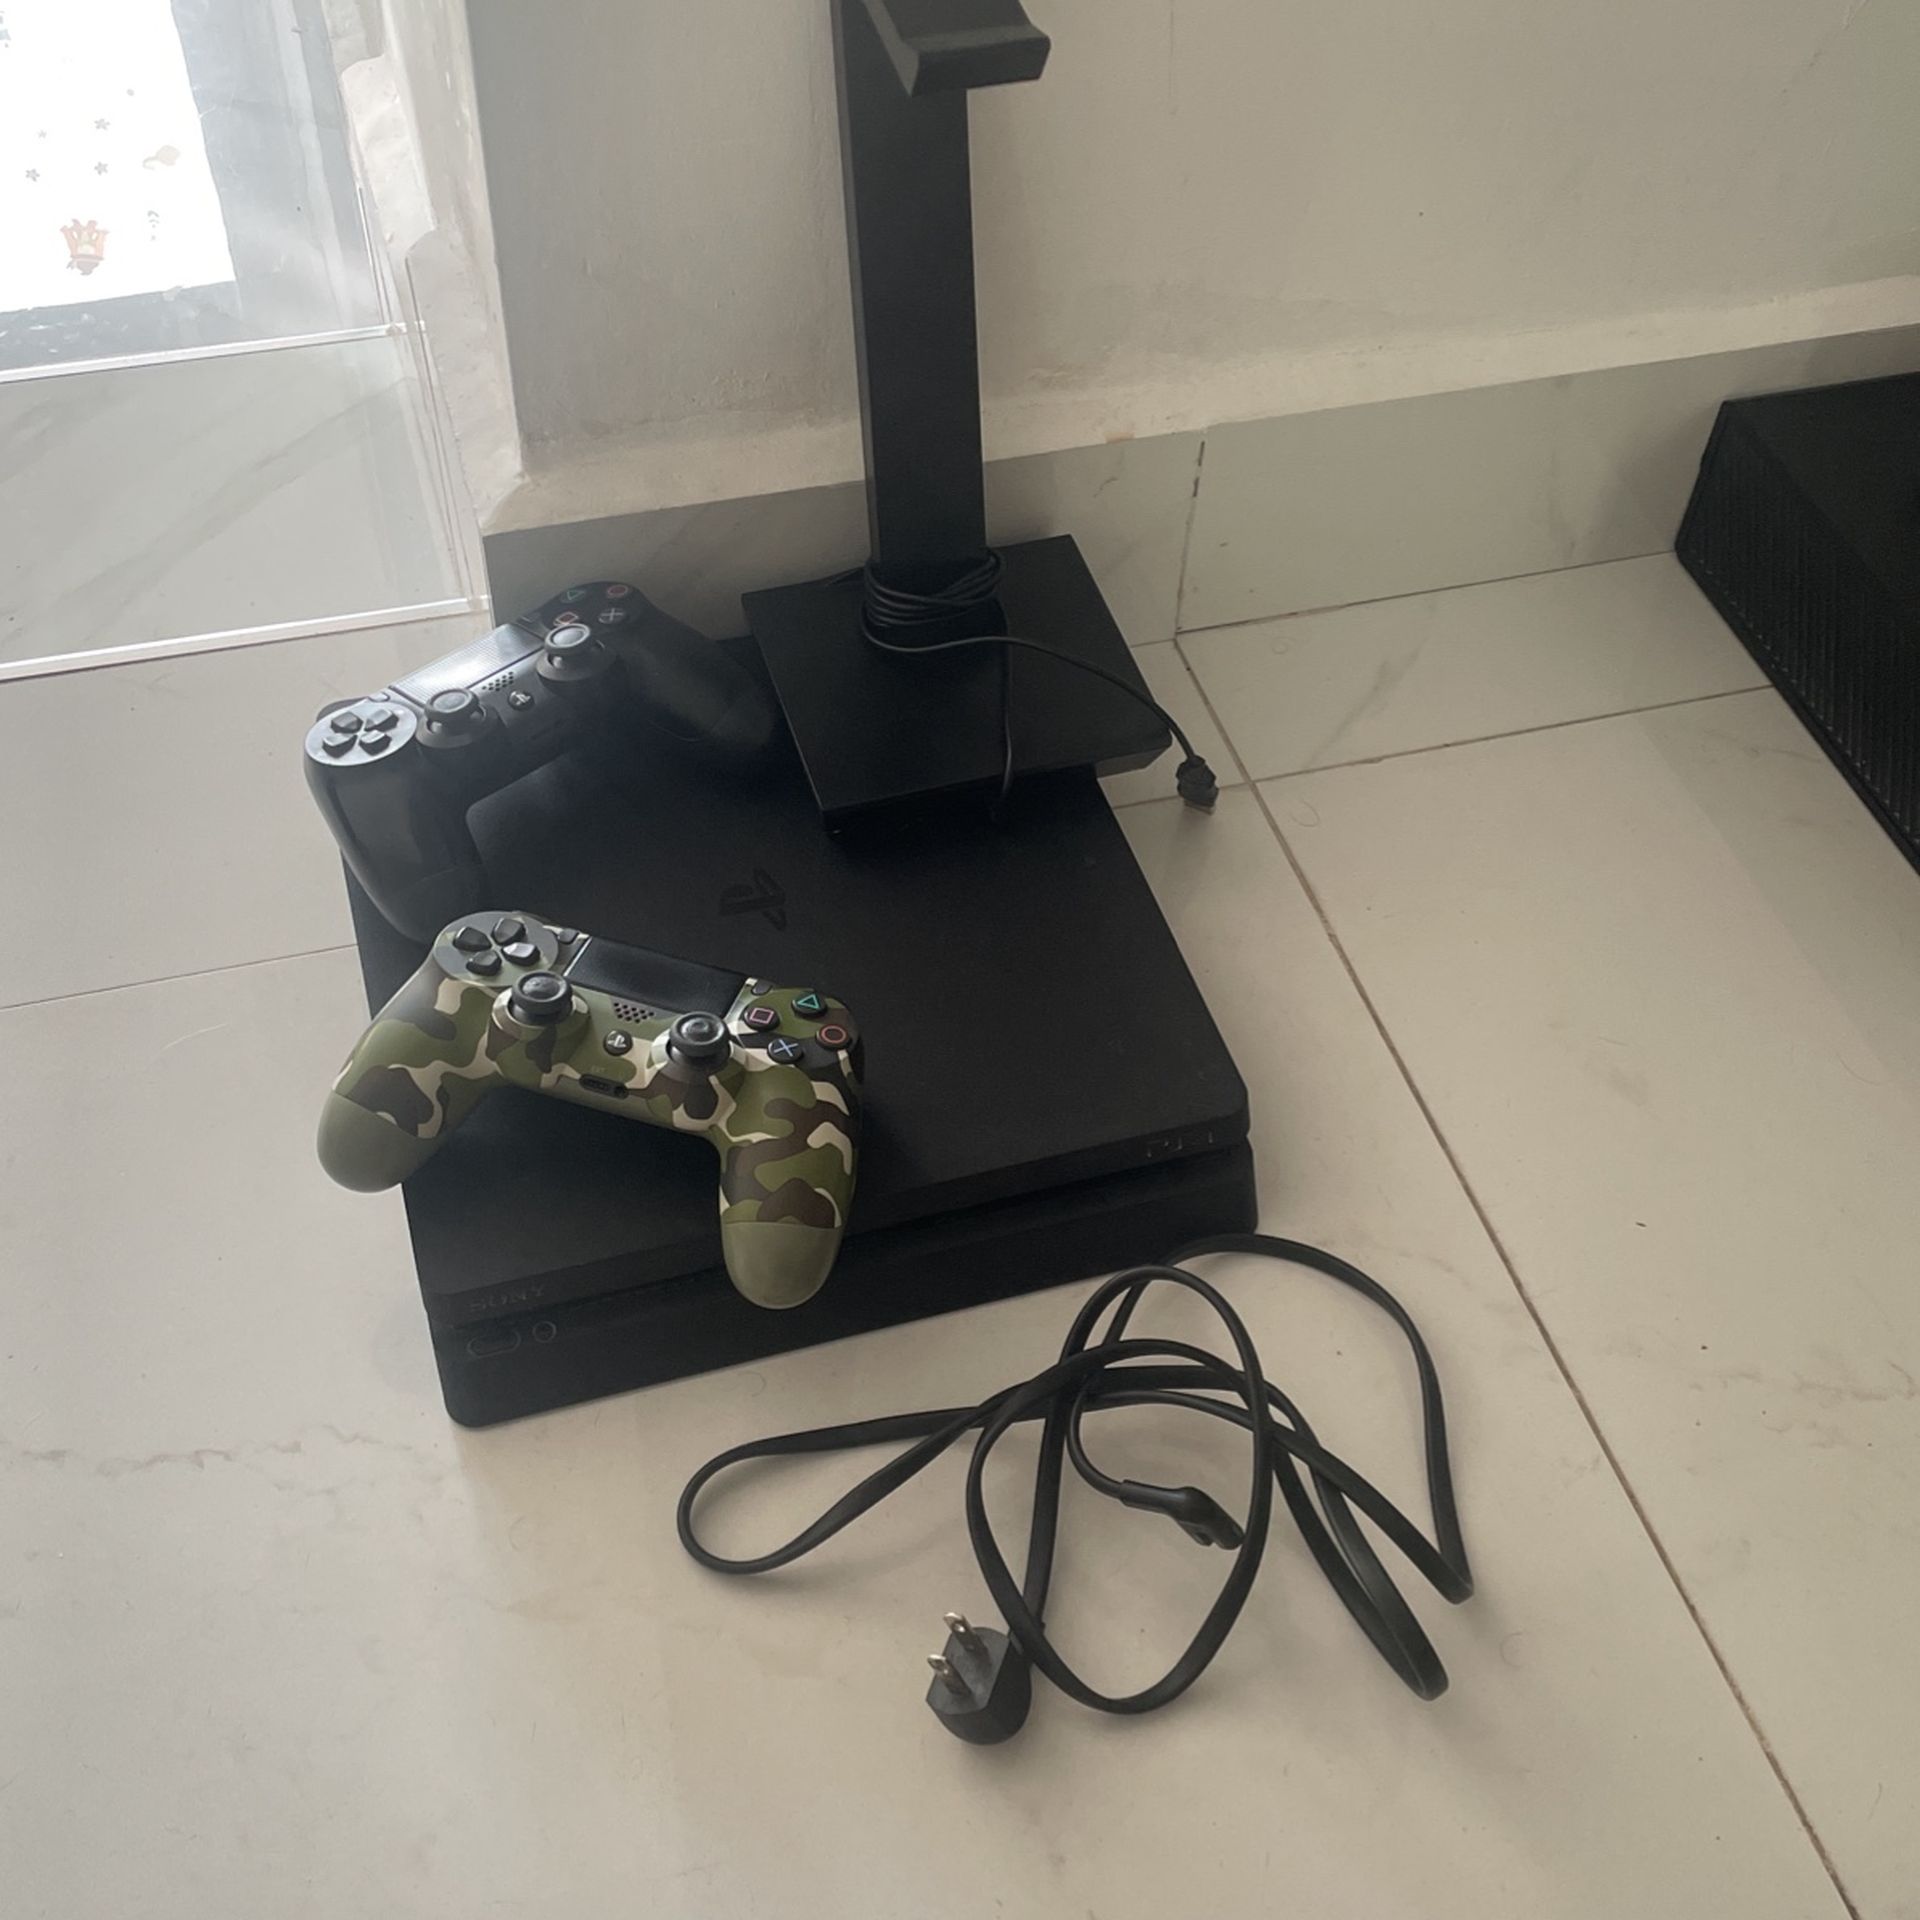 Ps4, W 2 Controllers